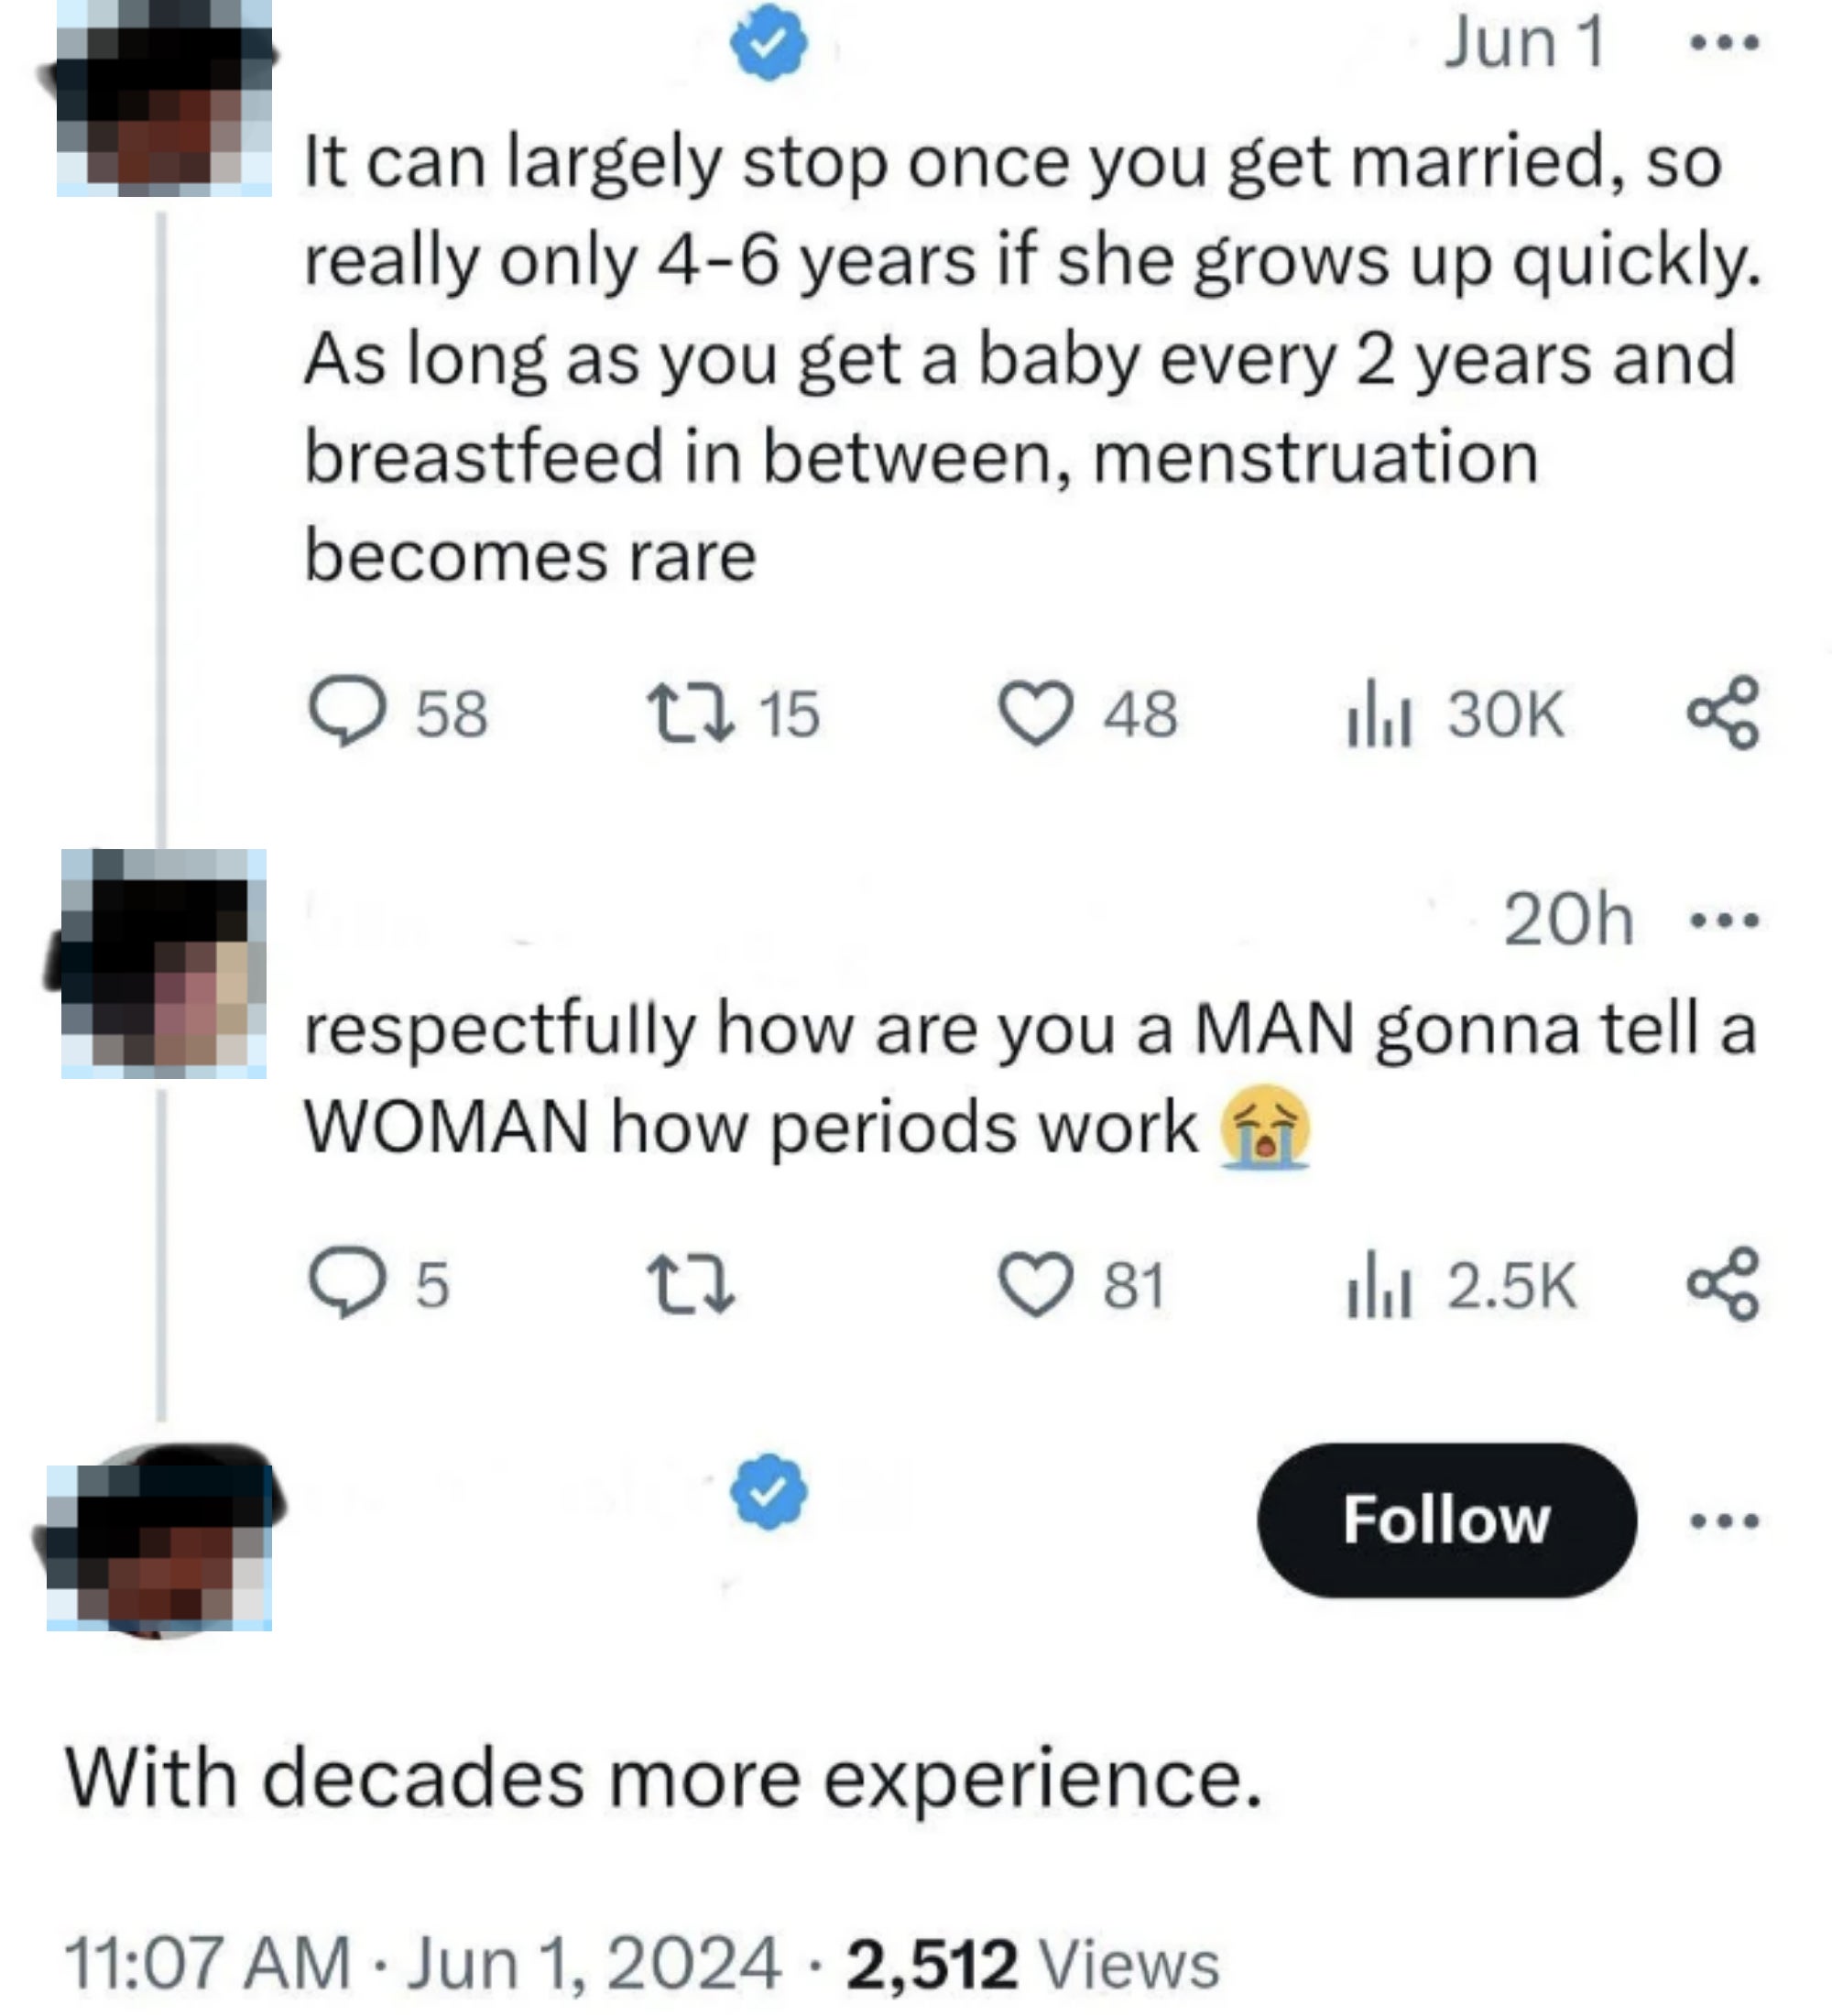 Conversation on Twitter about menstruation, with one user stating it stops after having a baby. Another user questions how a man can tell a woman about periods